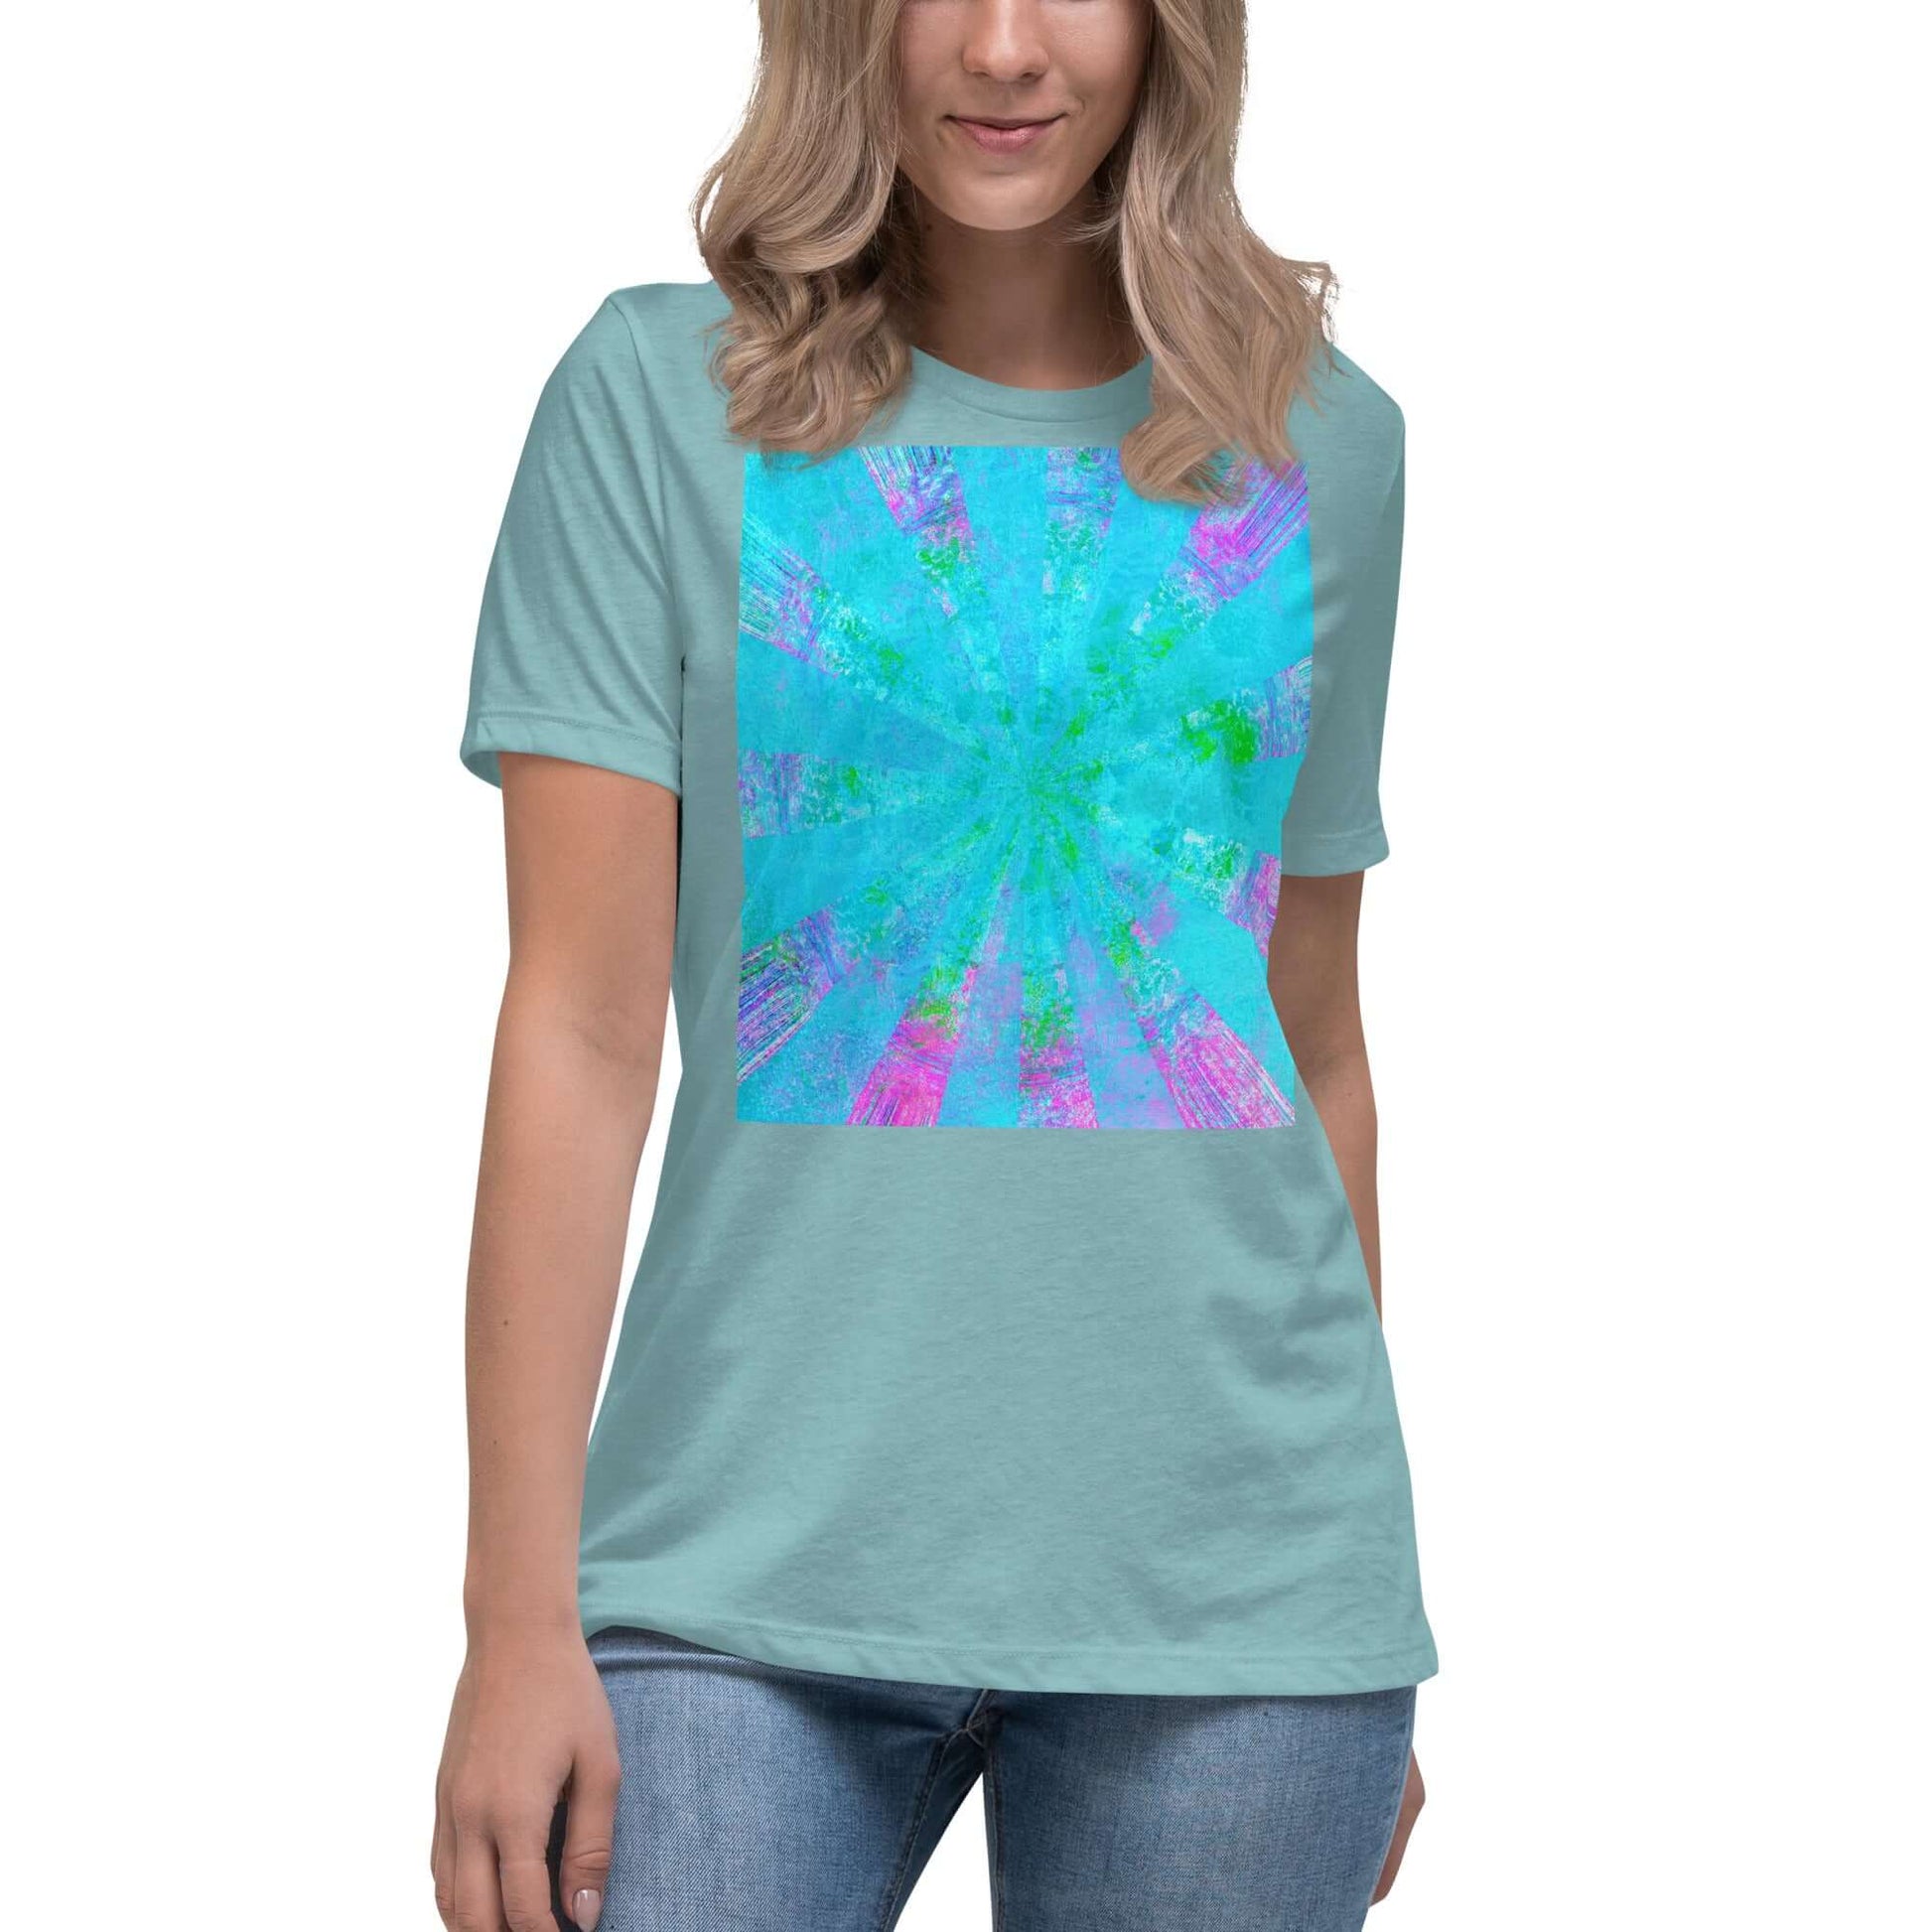 Turquoise Blue with Purple Radial Abstract Art “Blue Stingray” Women’s Short Sleeve Tee in Heather Blue Lagoon